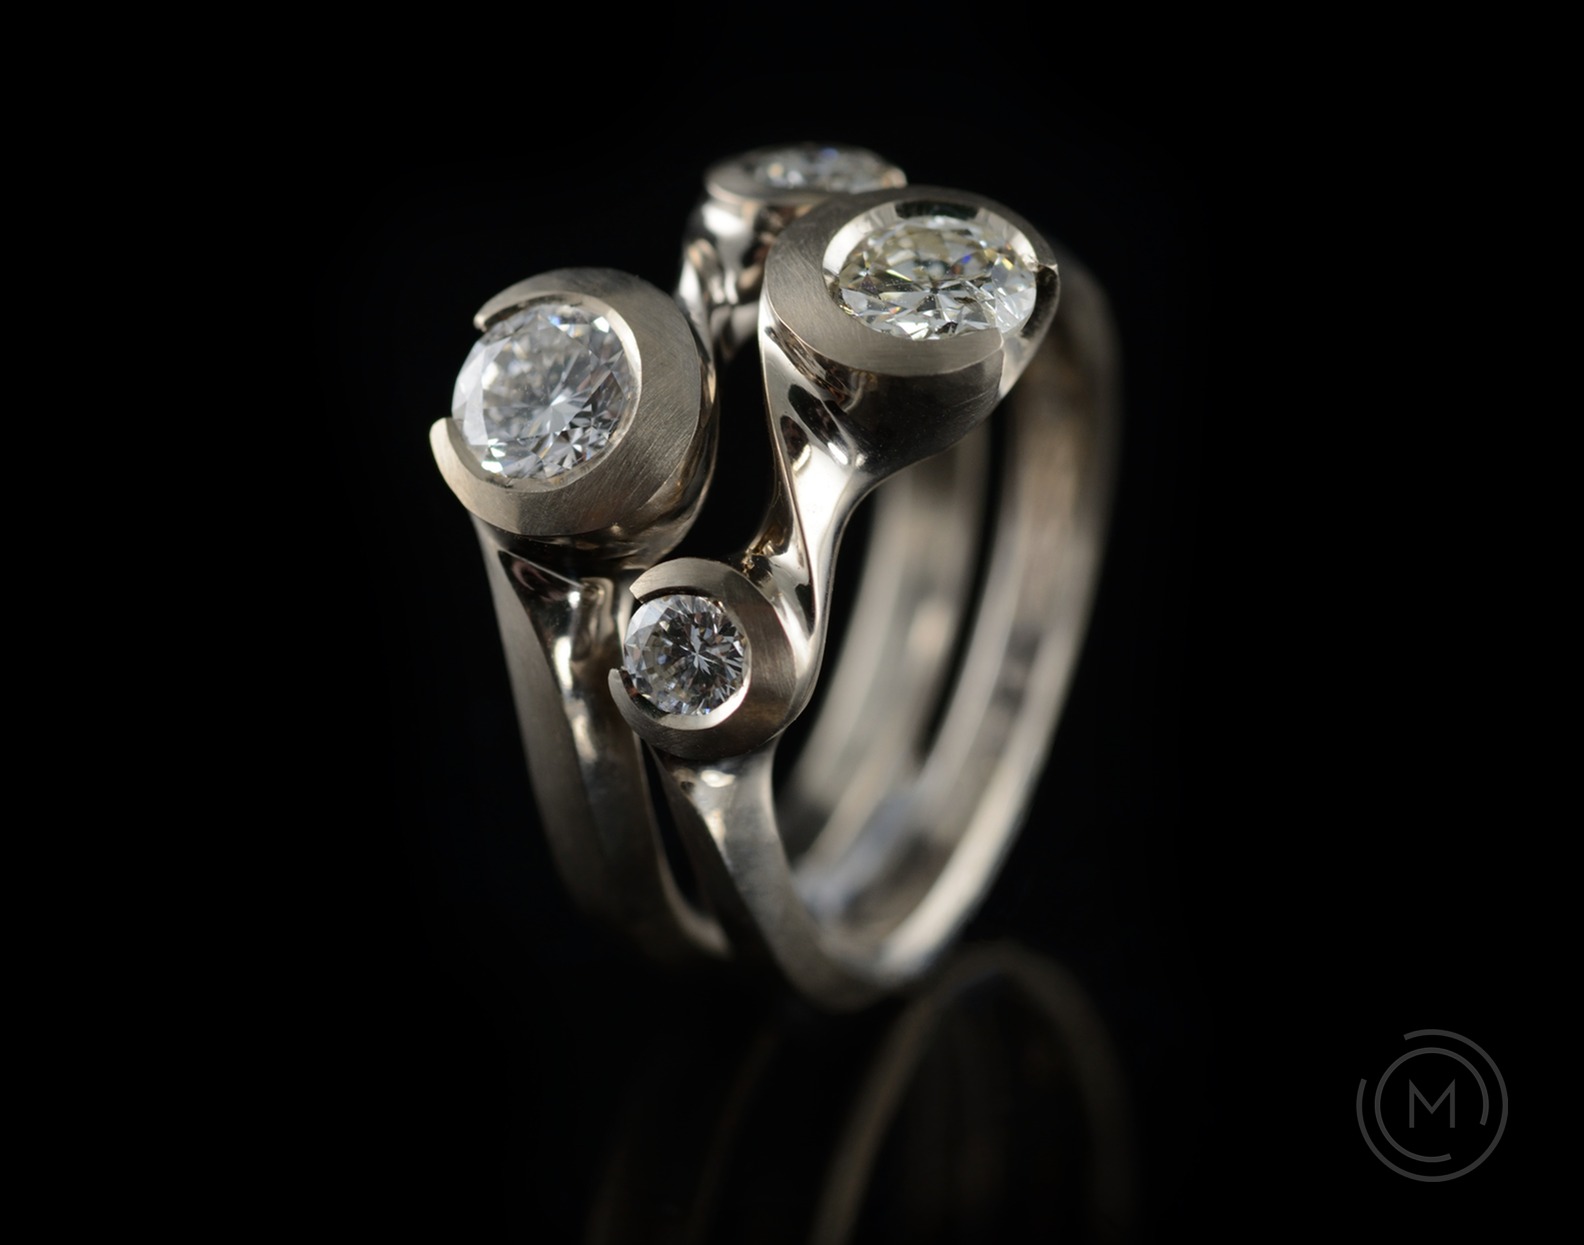 Arris organic carved white gold and diamond rings